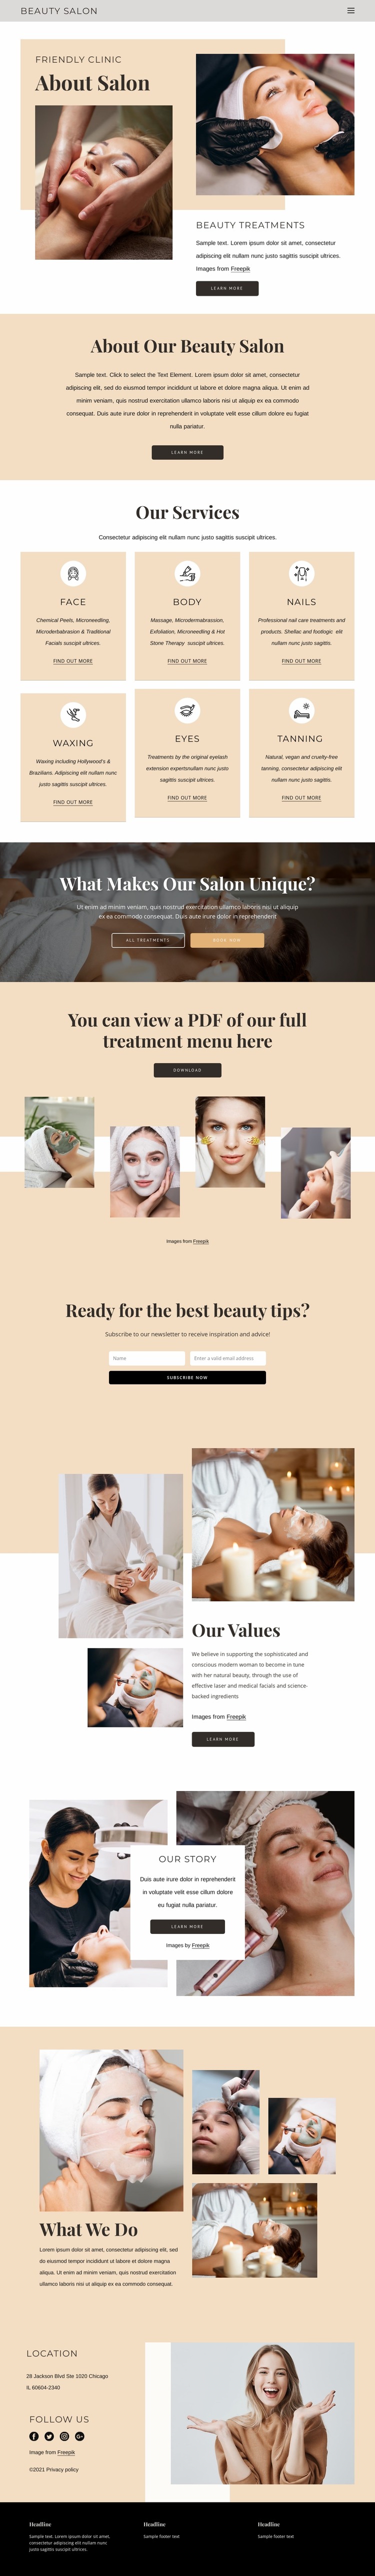 Beauty and aesthetic treatments Html Website Builder